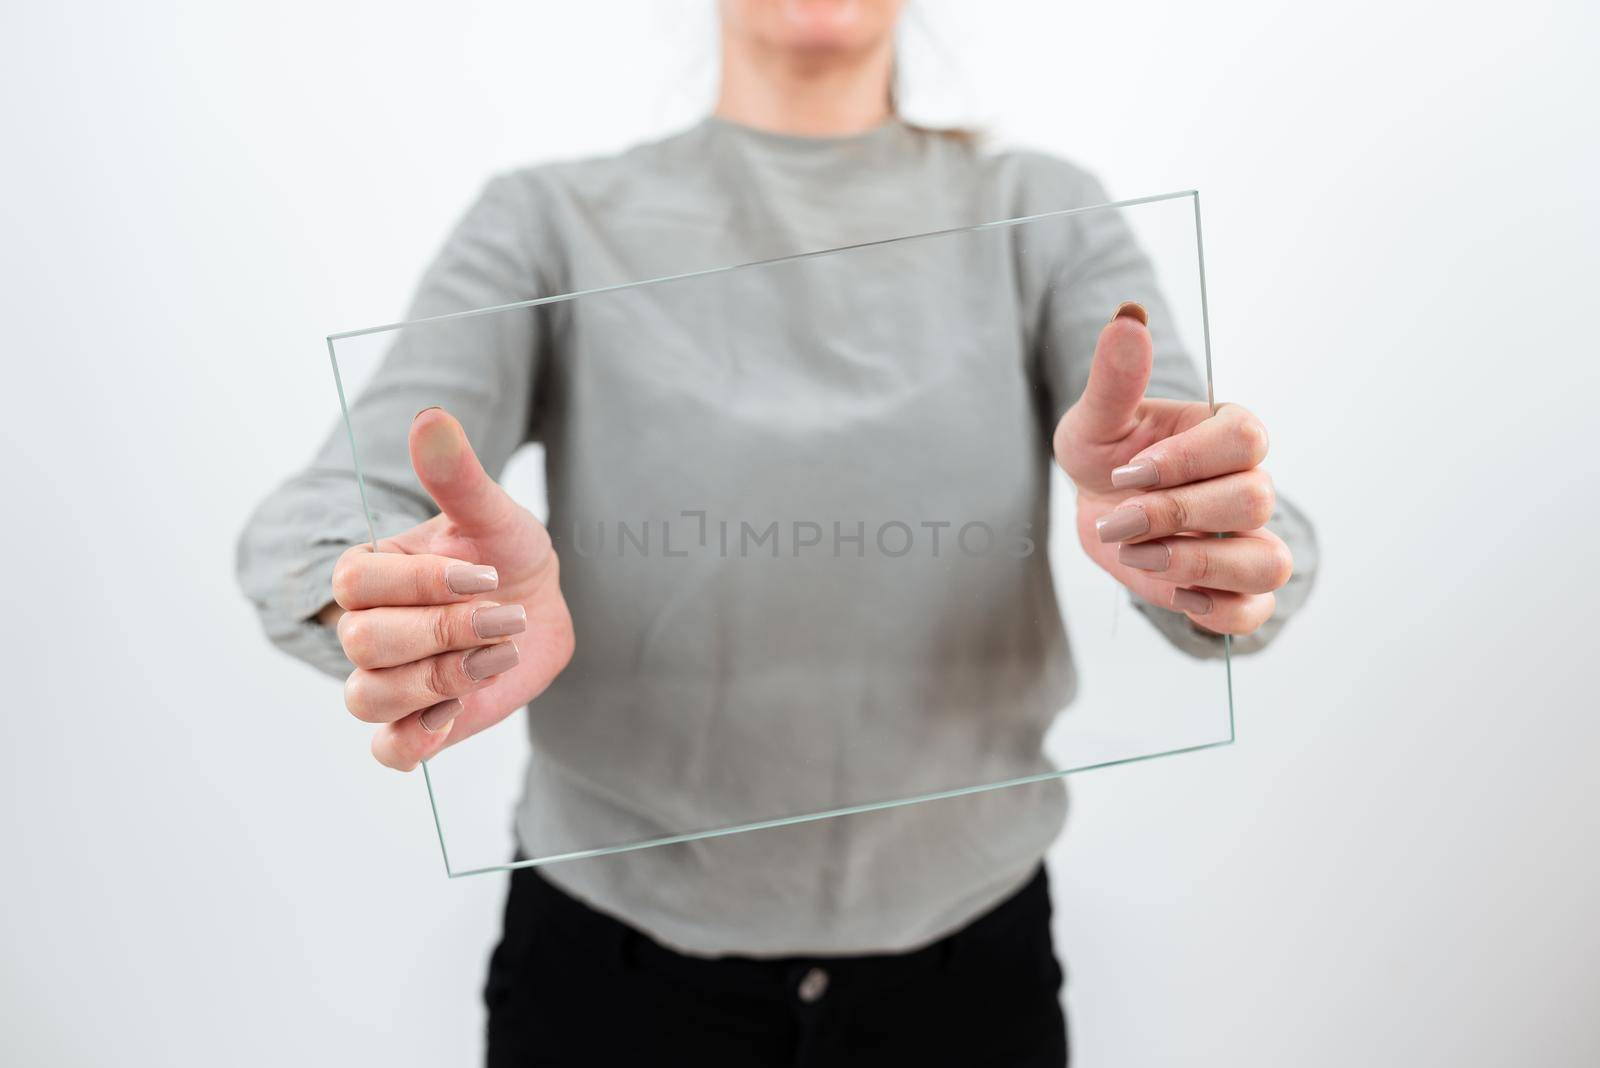 Female Professional Holding Transparent Glass And Displaying Important Data. Woman Wearing Smart Casual Showing Banner While Promoting The Business For Progress. by nialowwa